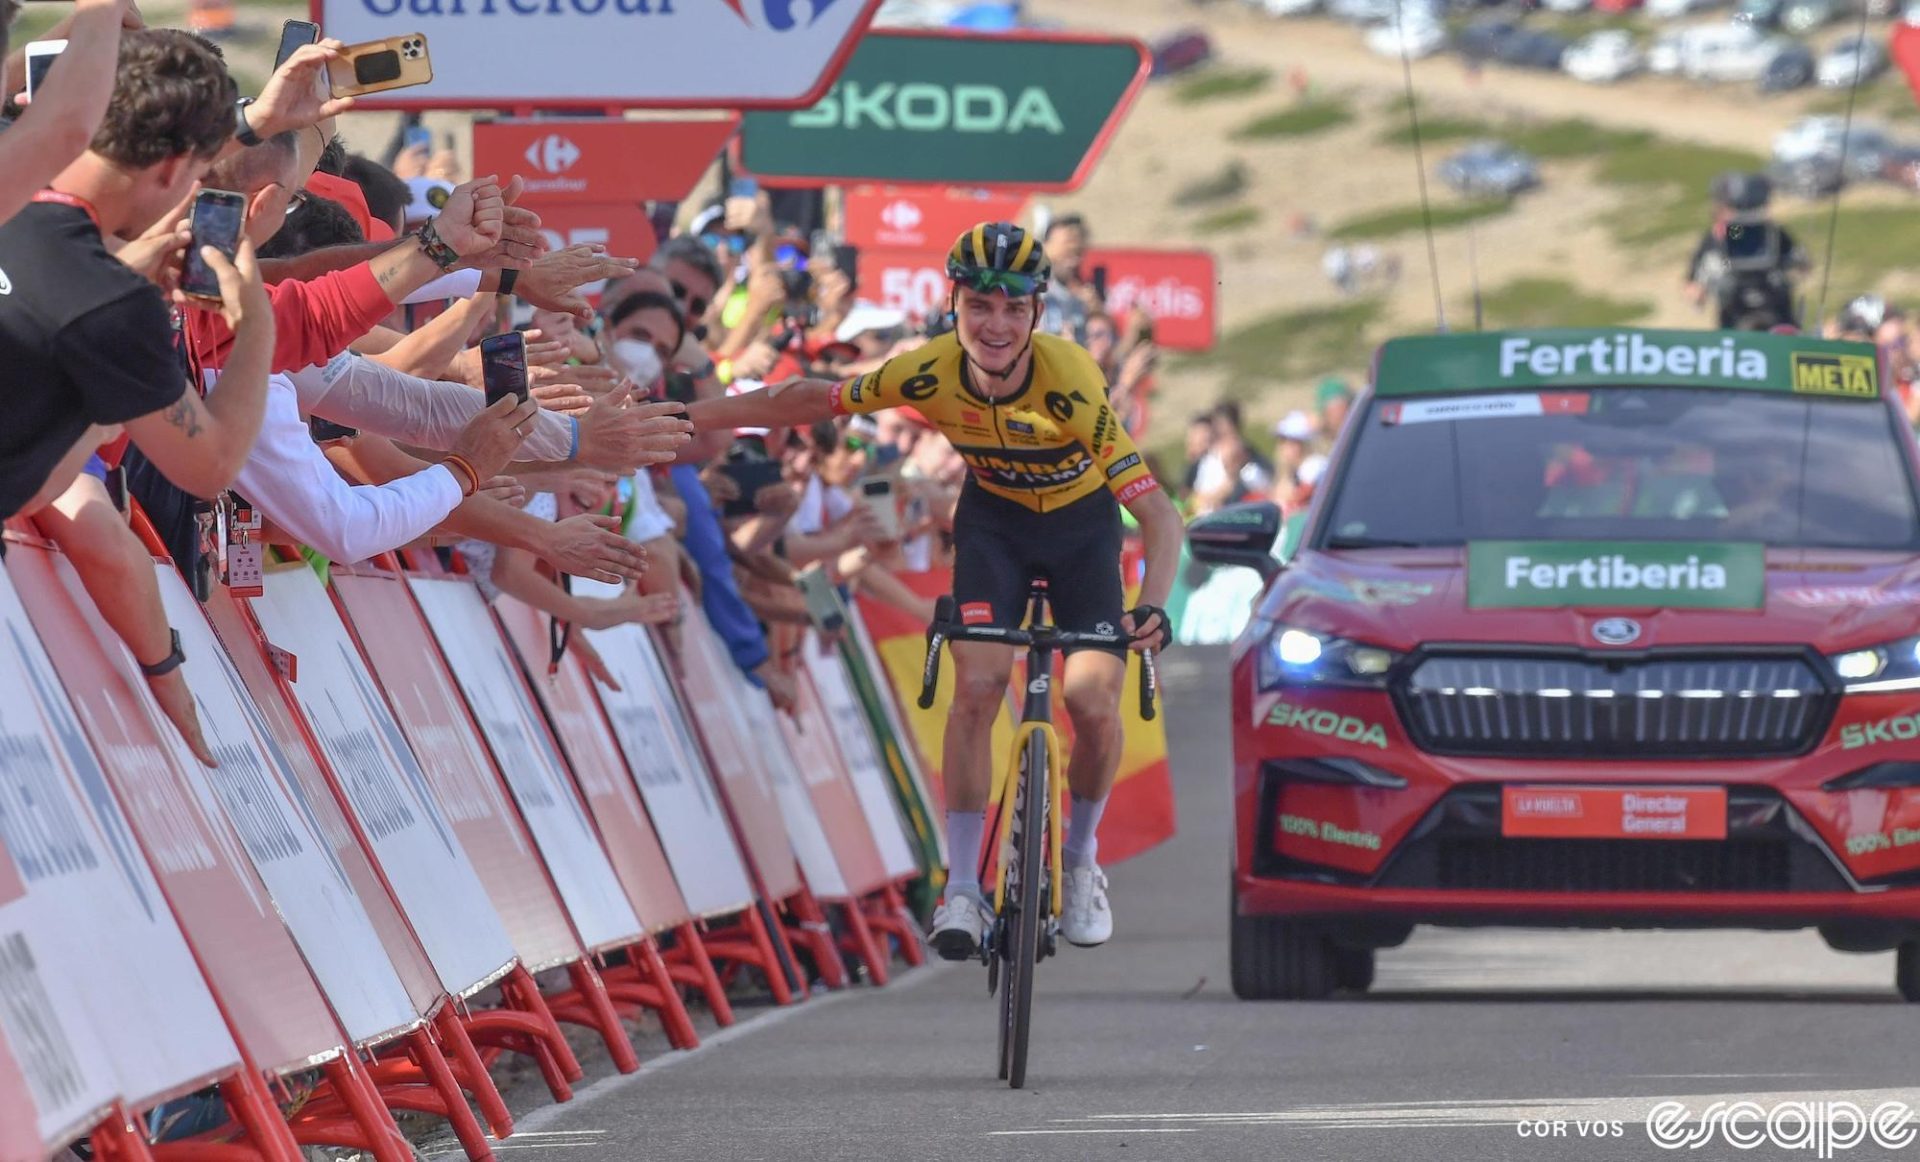 Sepp Kuss high-fives with fans approaching the finish of stage 6 of the 2023 Vuelta a España, which he won. He has a big smile on his face as he rides near the barriers with an outstretched right hand.